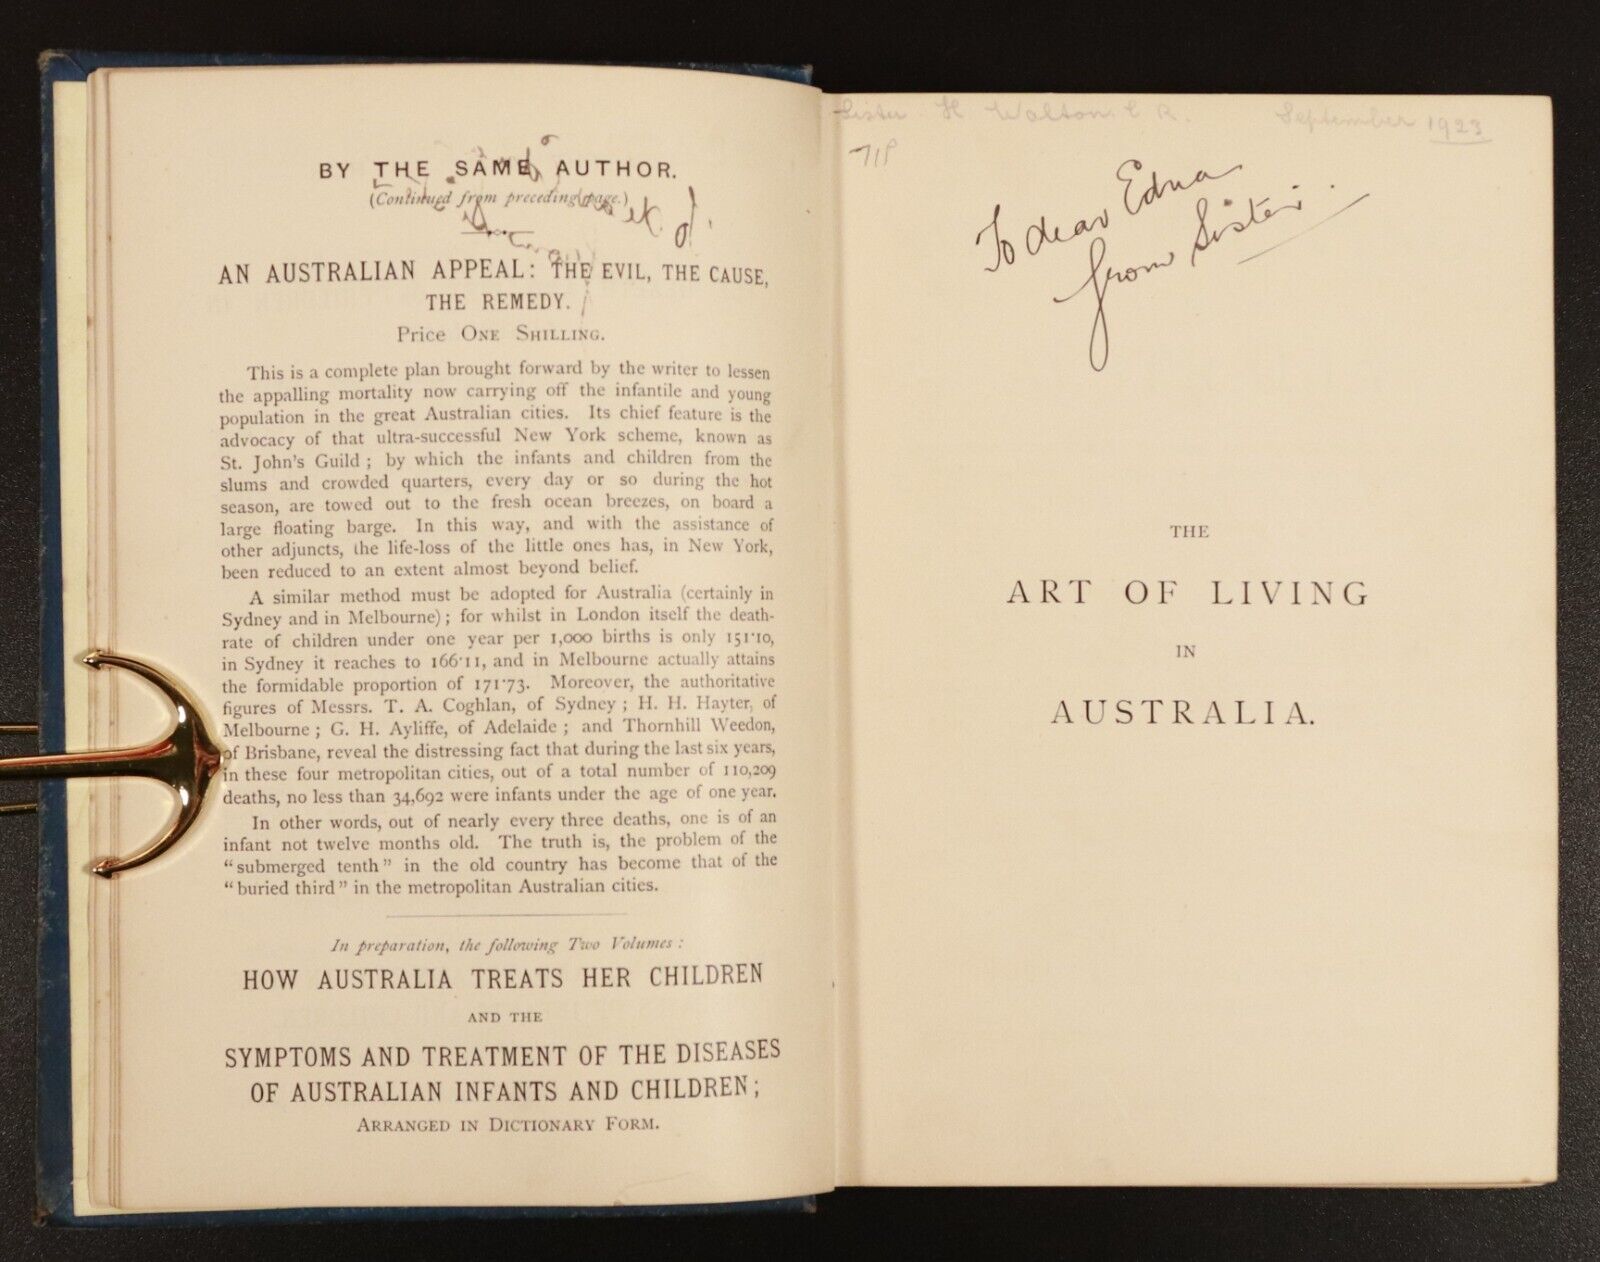 c1893 The Art Of Living In Australia by Philip E. Muskett Antique Cook Book